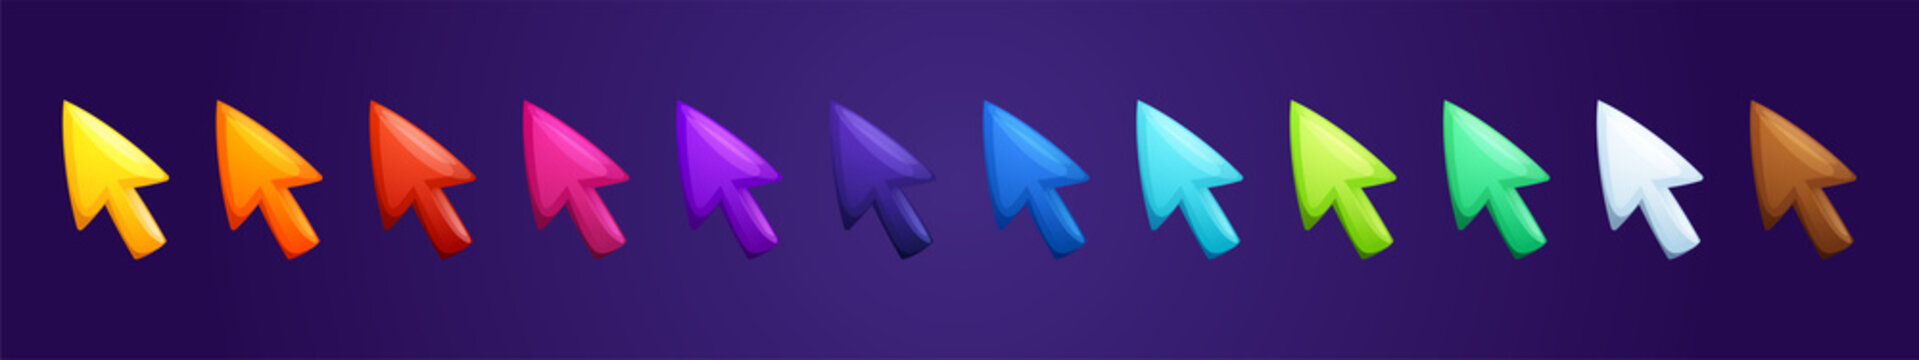 Colorful arrows, mouse cursors for computer game and ui design. Vector cartoon set of glossy pointers, cute arrow buttons and icons for user interface isolated on blue background